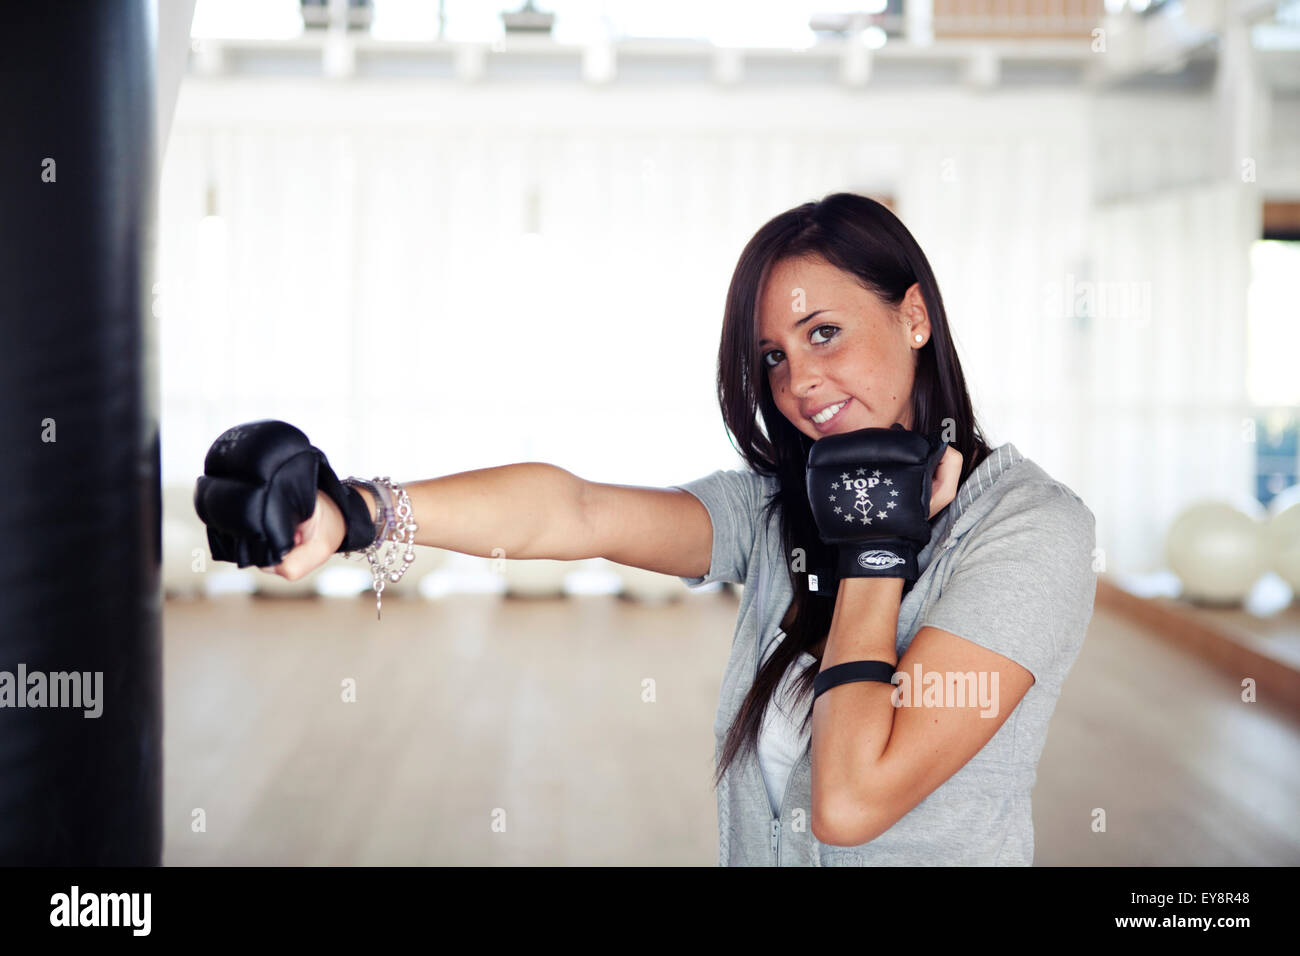 Young girl in her 20s training with boxing gloves Stock Photo